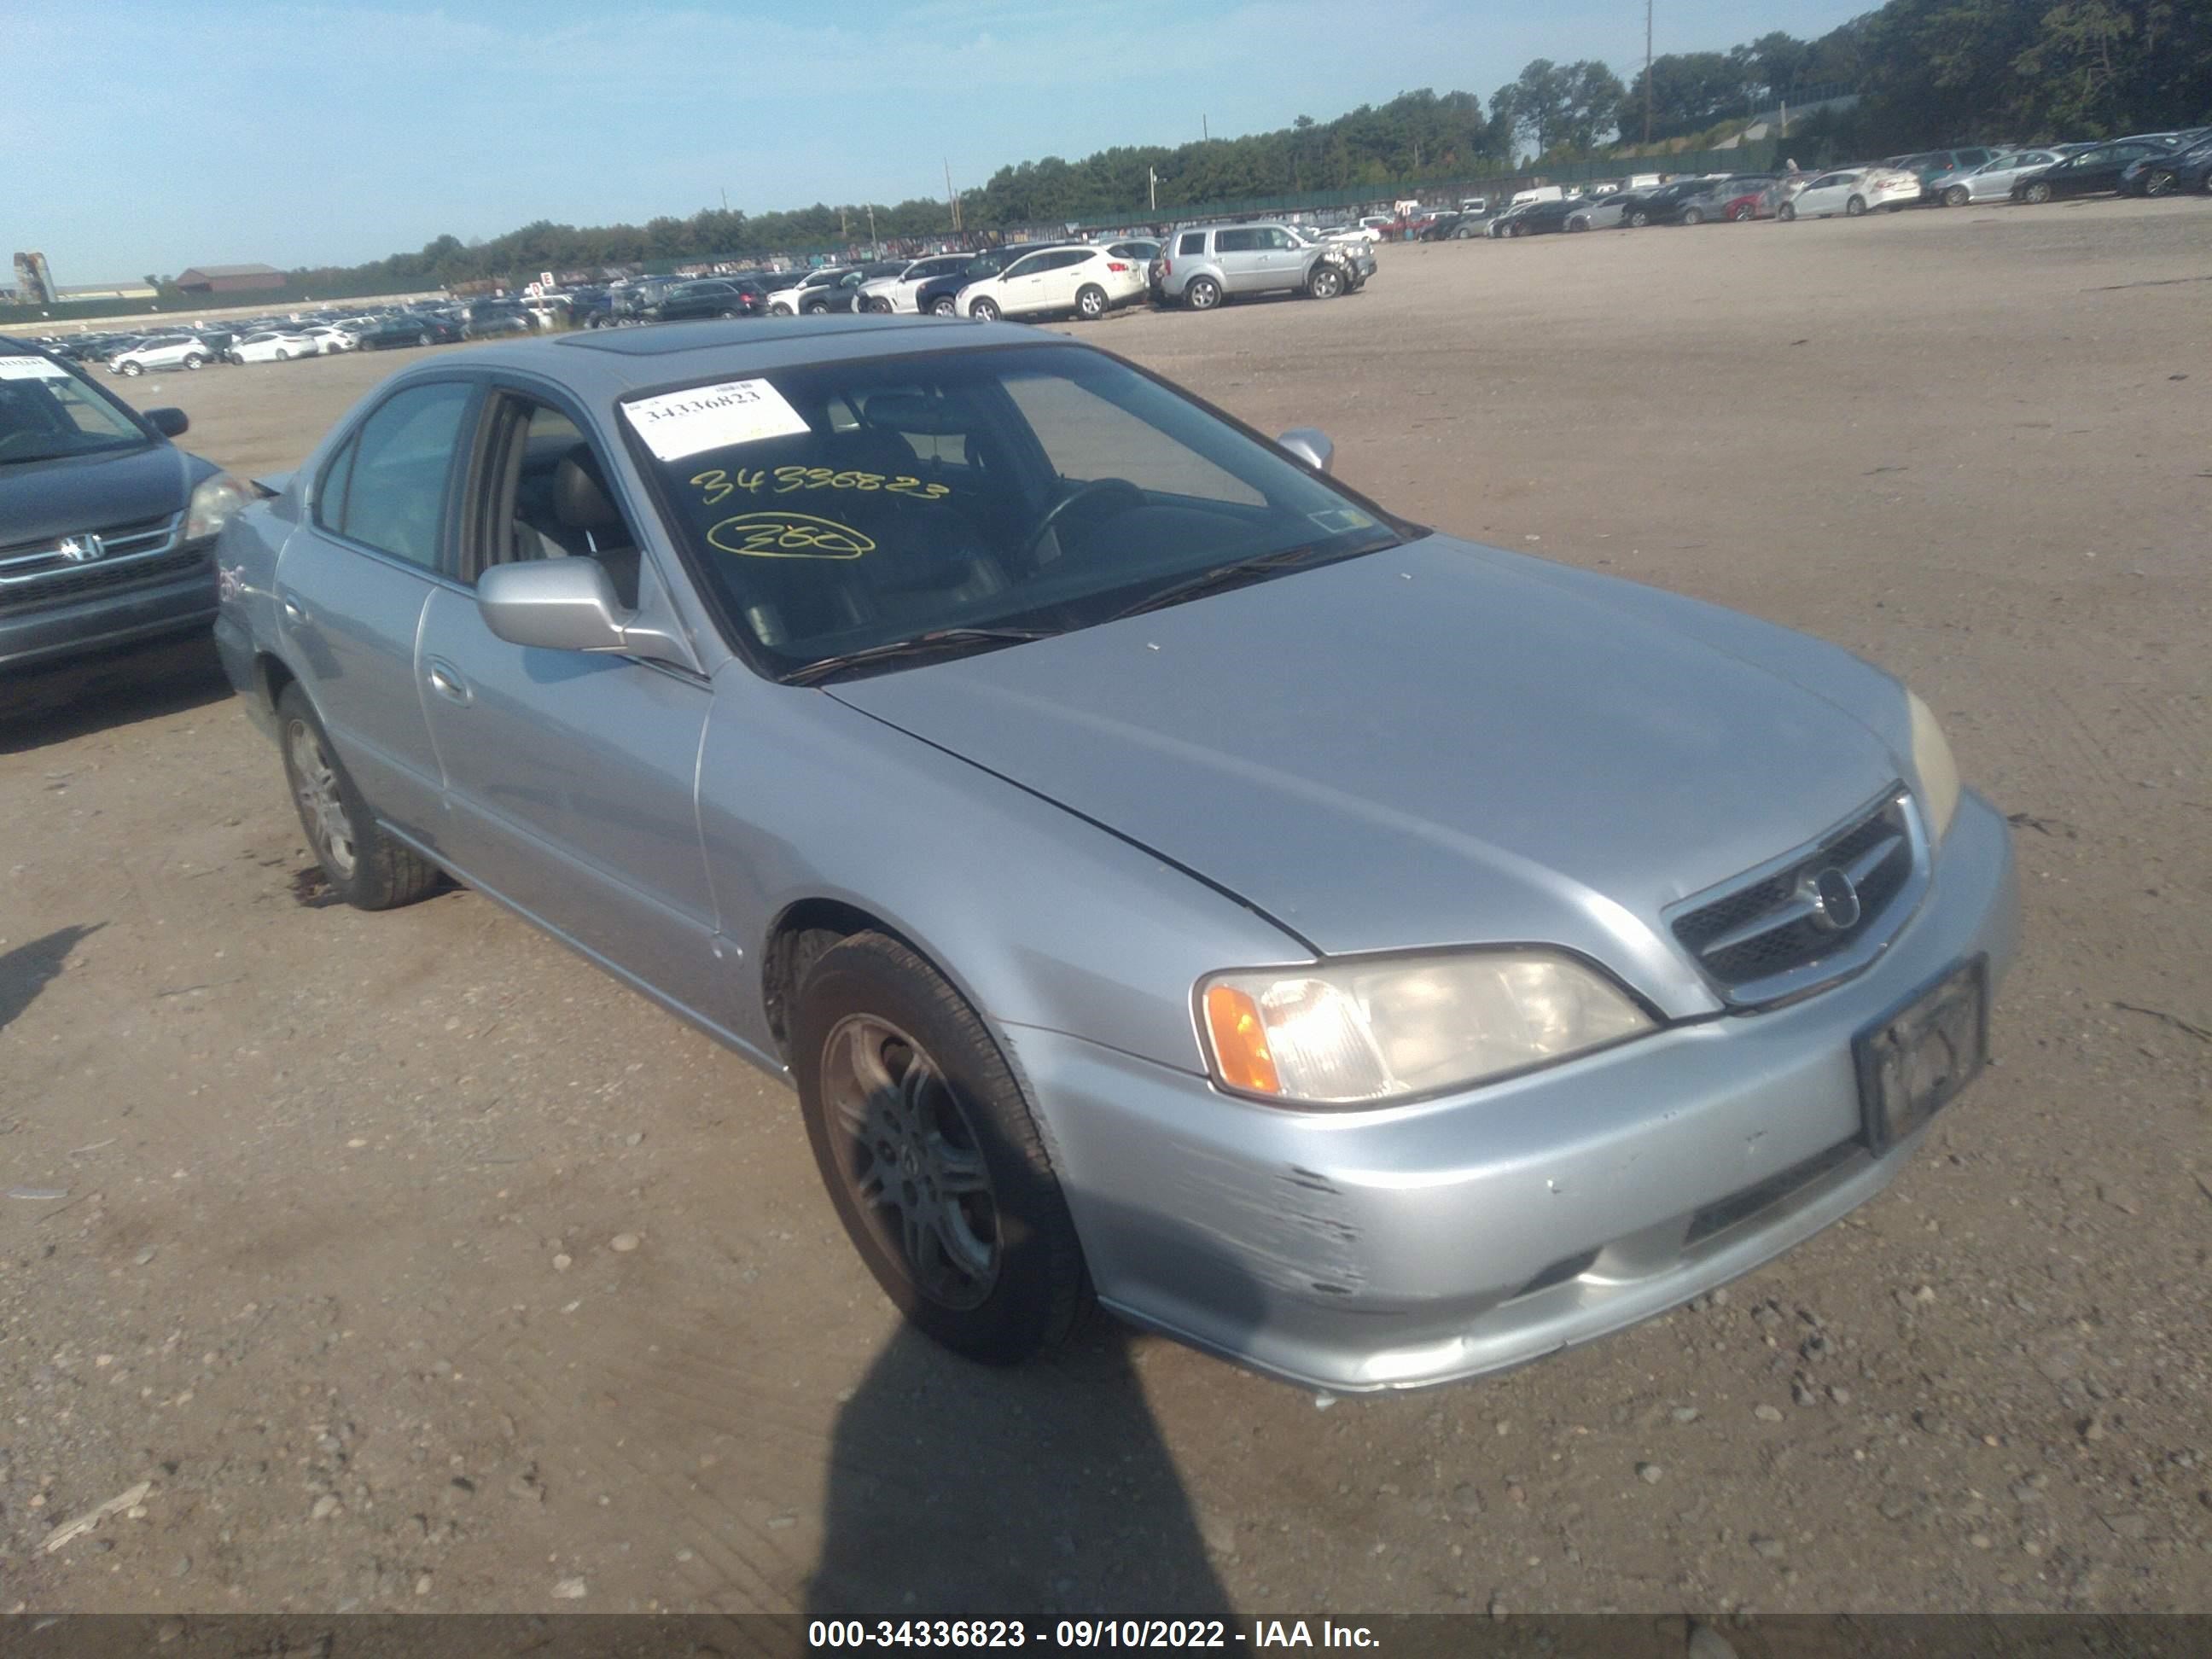 2001 ACURA TL W/NAVIGATION SYSTEM VIN: 19UUA56761A023540